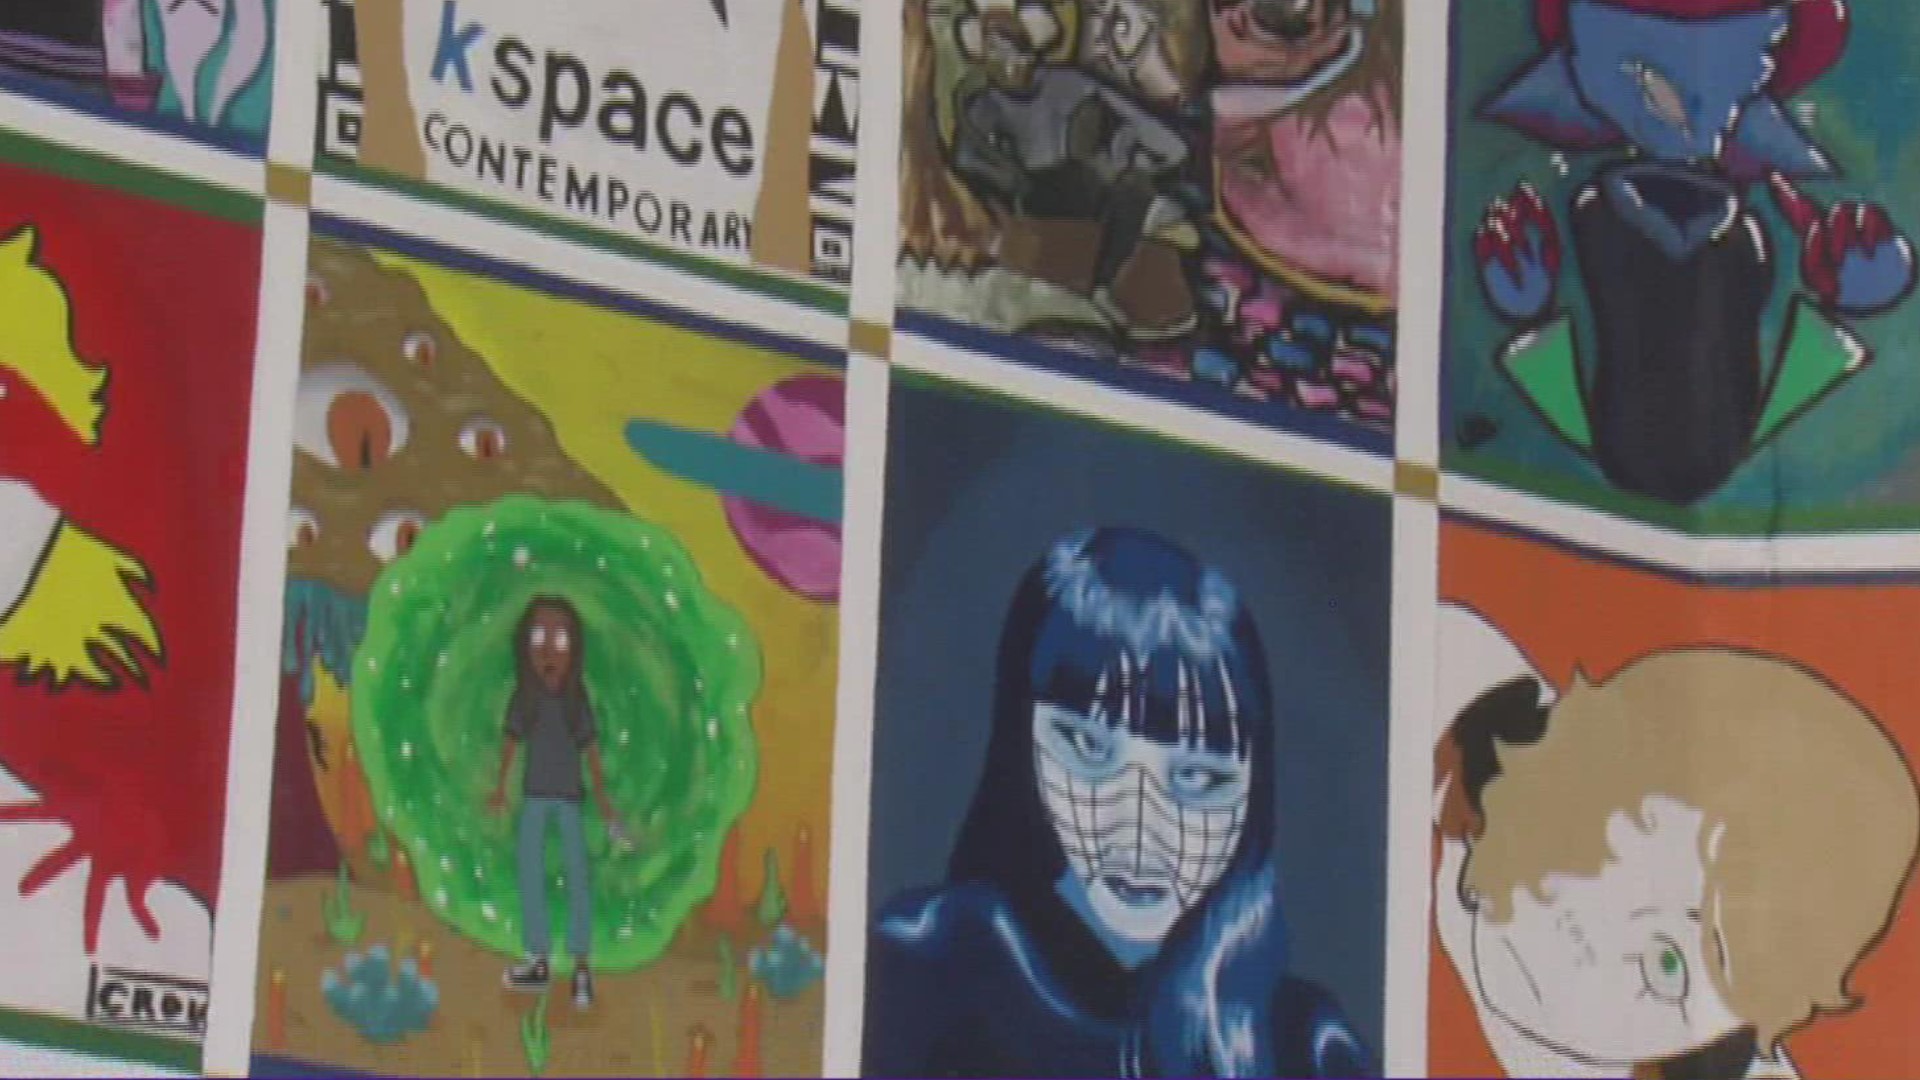 The art on display tells stories of the rich culture of the Coastal Bend